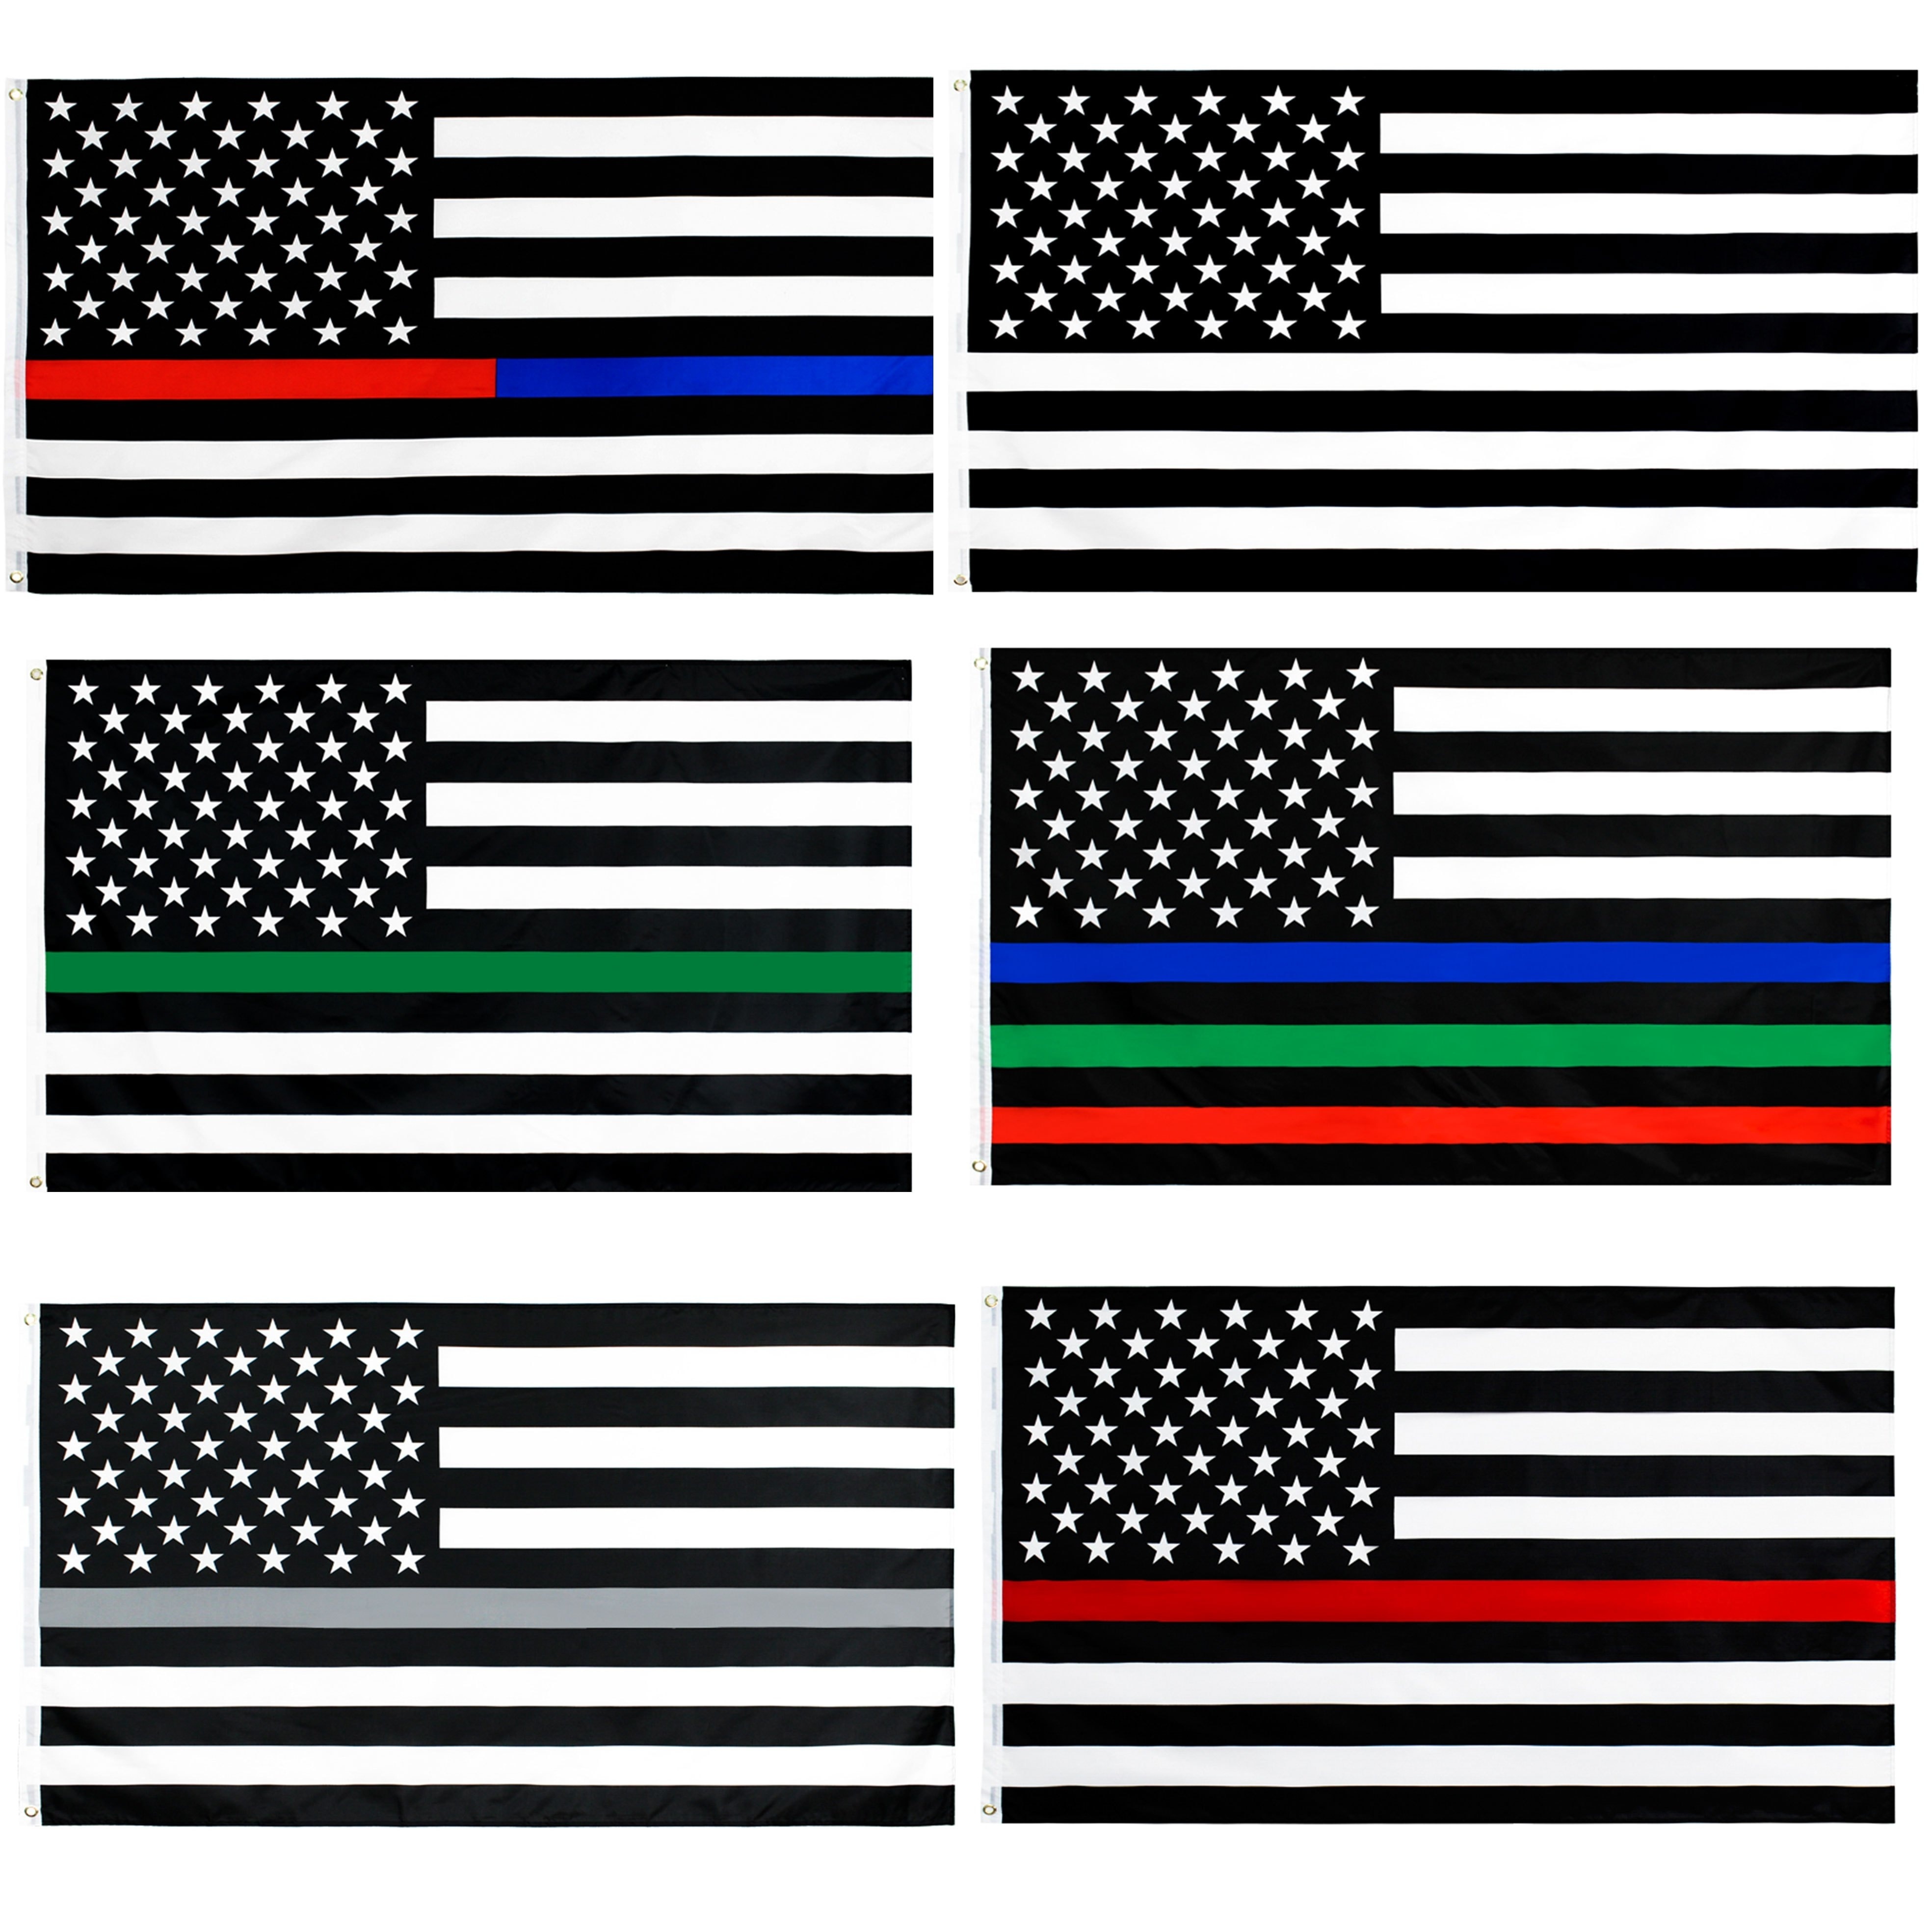  Thin Blue Green and Red Line American Flag 3x5- Heavy Duty  Polyester American Blue Red Green Stripe All Lives Matter Police  Firefighter Military Flags Banner Law Enforcement Police Fireman Army